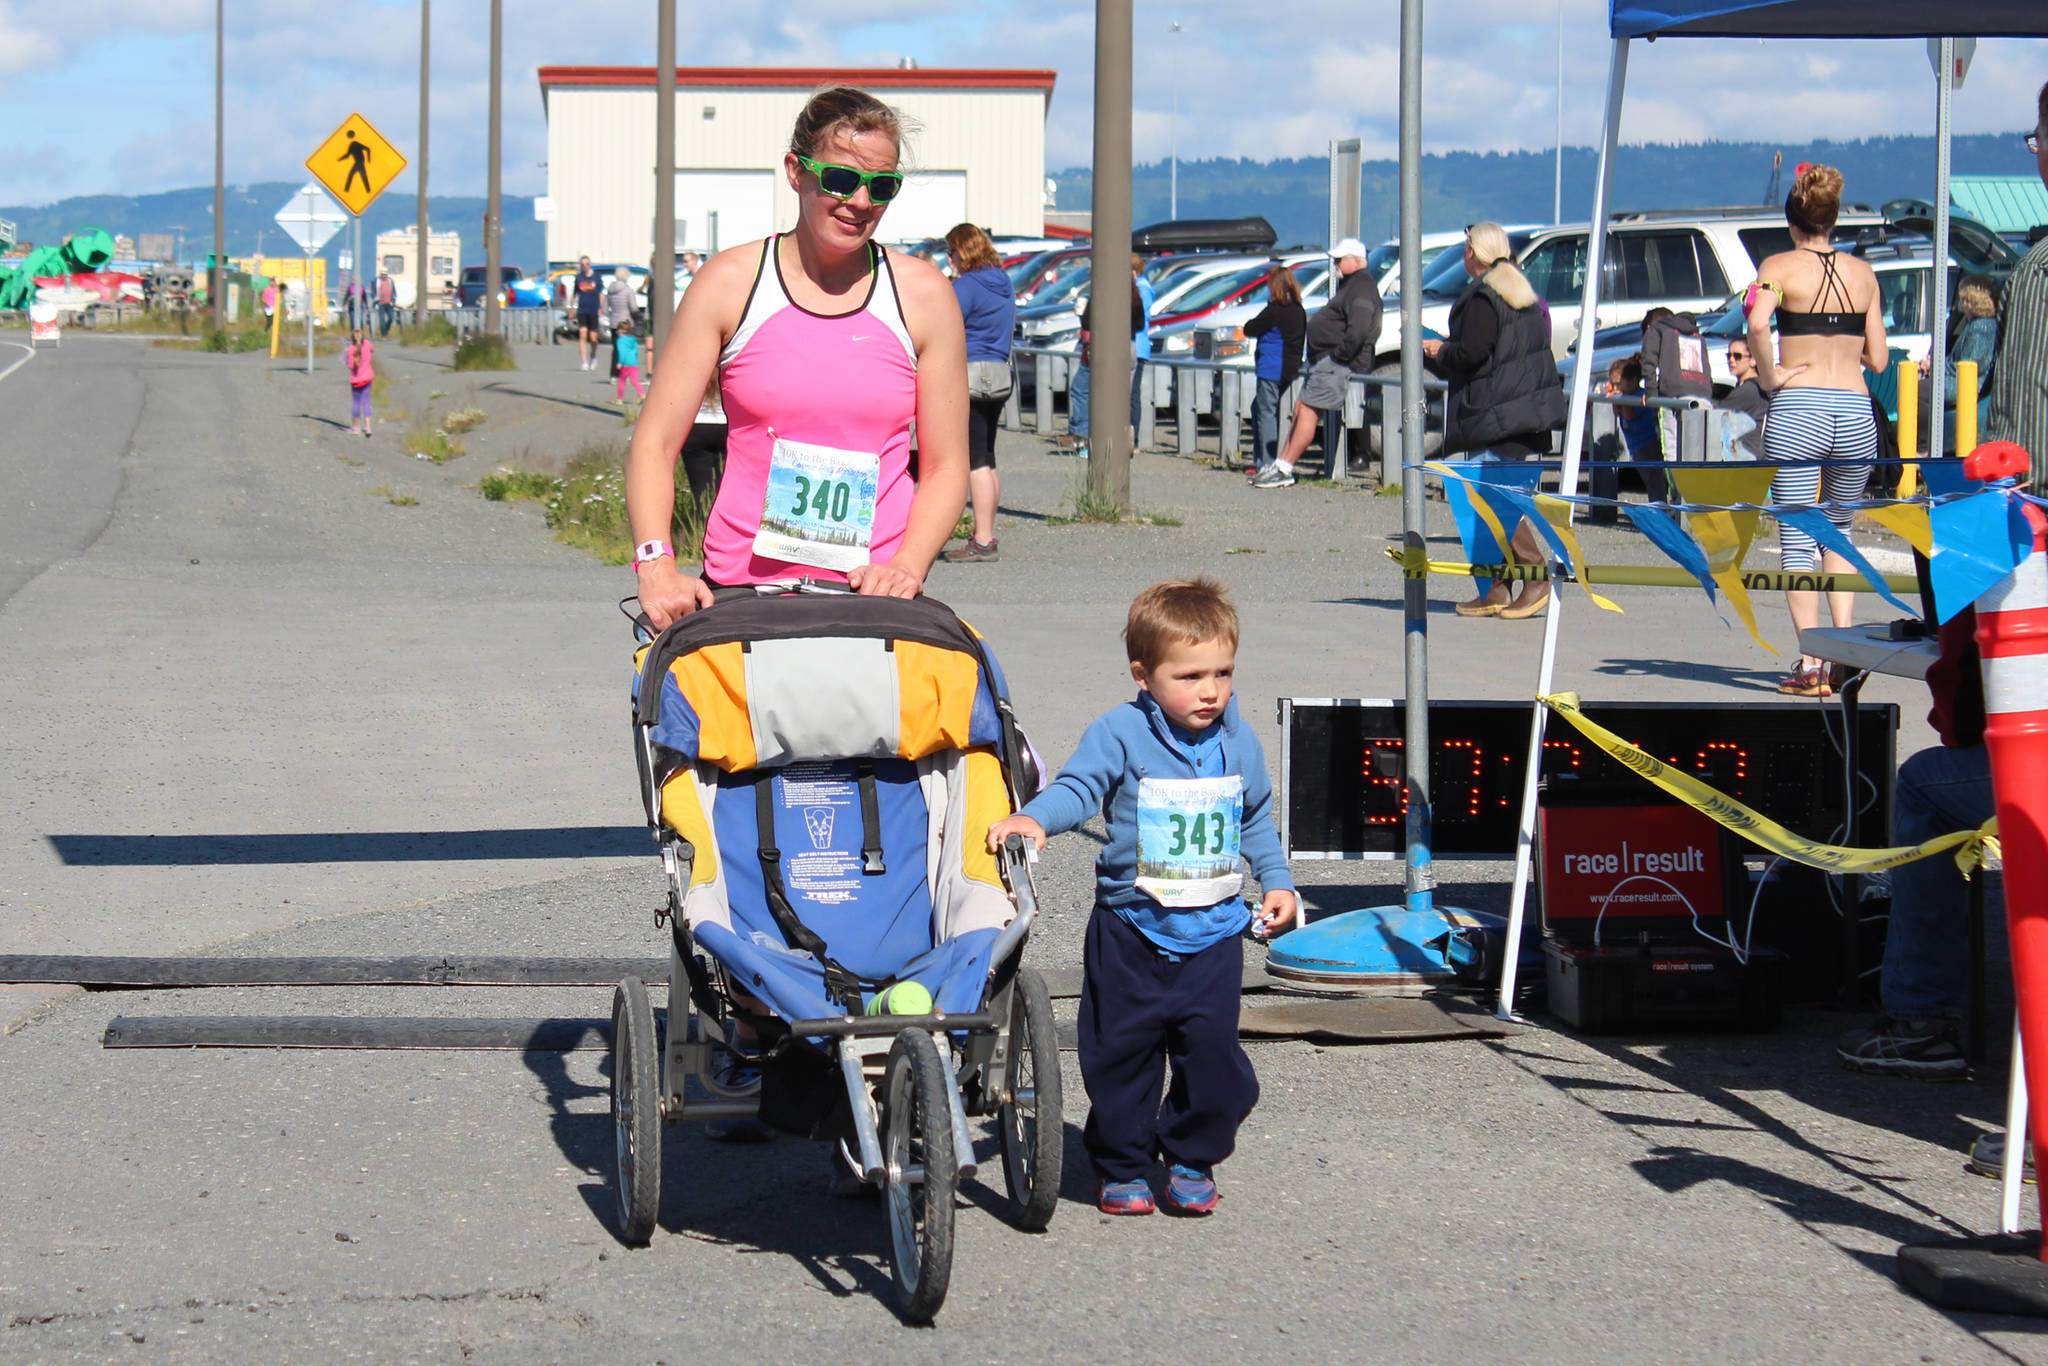 <span class="neFMT neFMT_PhotoCredit">Photo by Megan Pacer/Homer News</span>                                Homer’s Janelle Moerlein crosses the Homer Spit Run finish line with Renn Marden on Saturday, June 30 at Land’s End Resort in Homer. Read the results of this year’s Spit Run 10K and Cosmic Hamlet Half Marathon on Page A6.